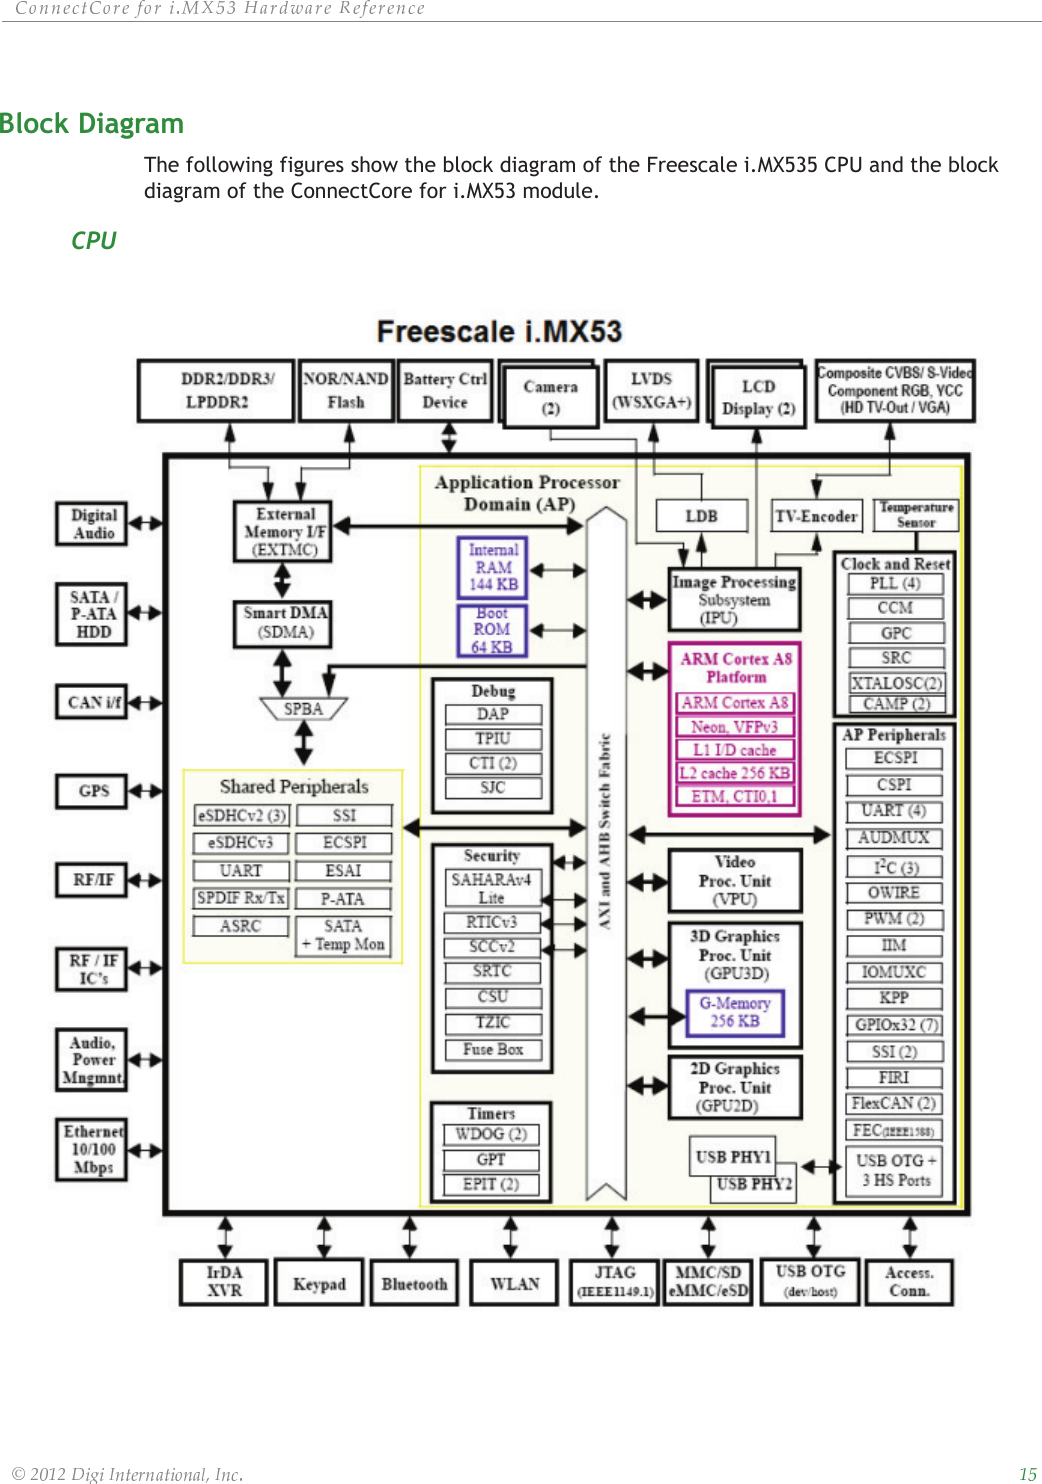 ȱ ȱ ȱ ȱ ȱ ȱȱ ȱ ȱ ȱ ȱȱȱȱȱBlock DiagramThe following figures show the block diagram of the Freescale i.MX535 CPU and the block diagram of the ConnectCore for i.MX53 module.CPU